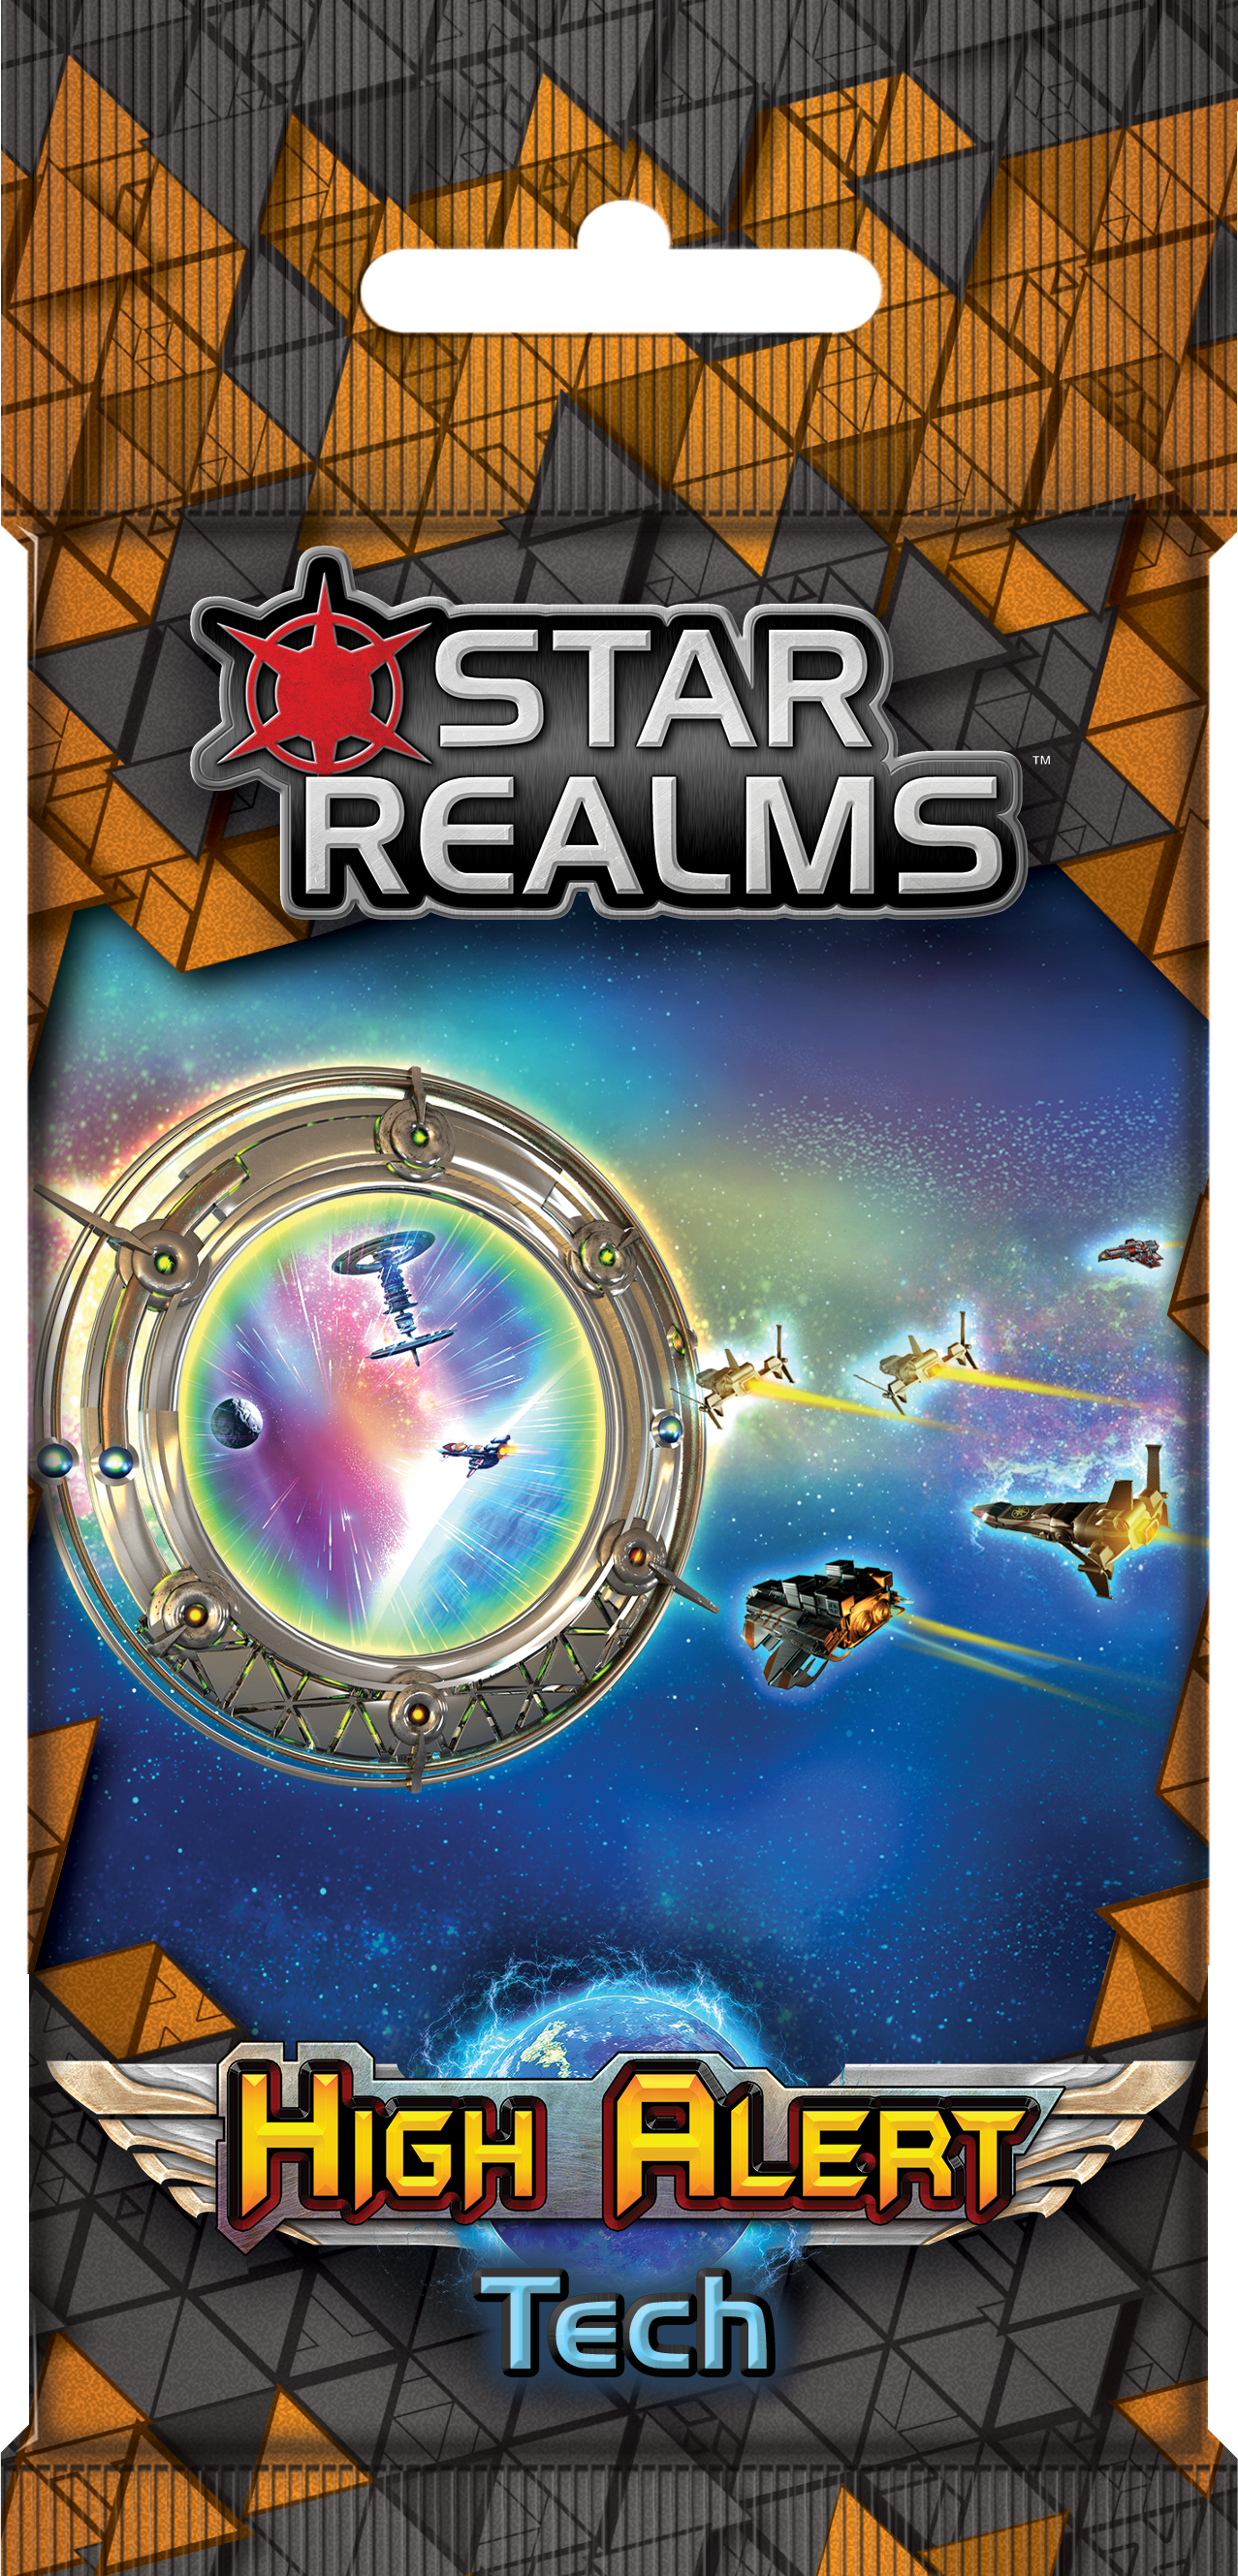 Star Realms - Extension United : Commandement